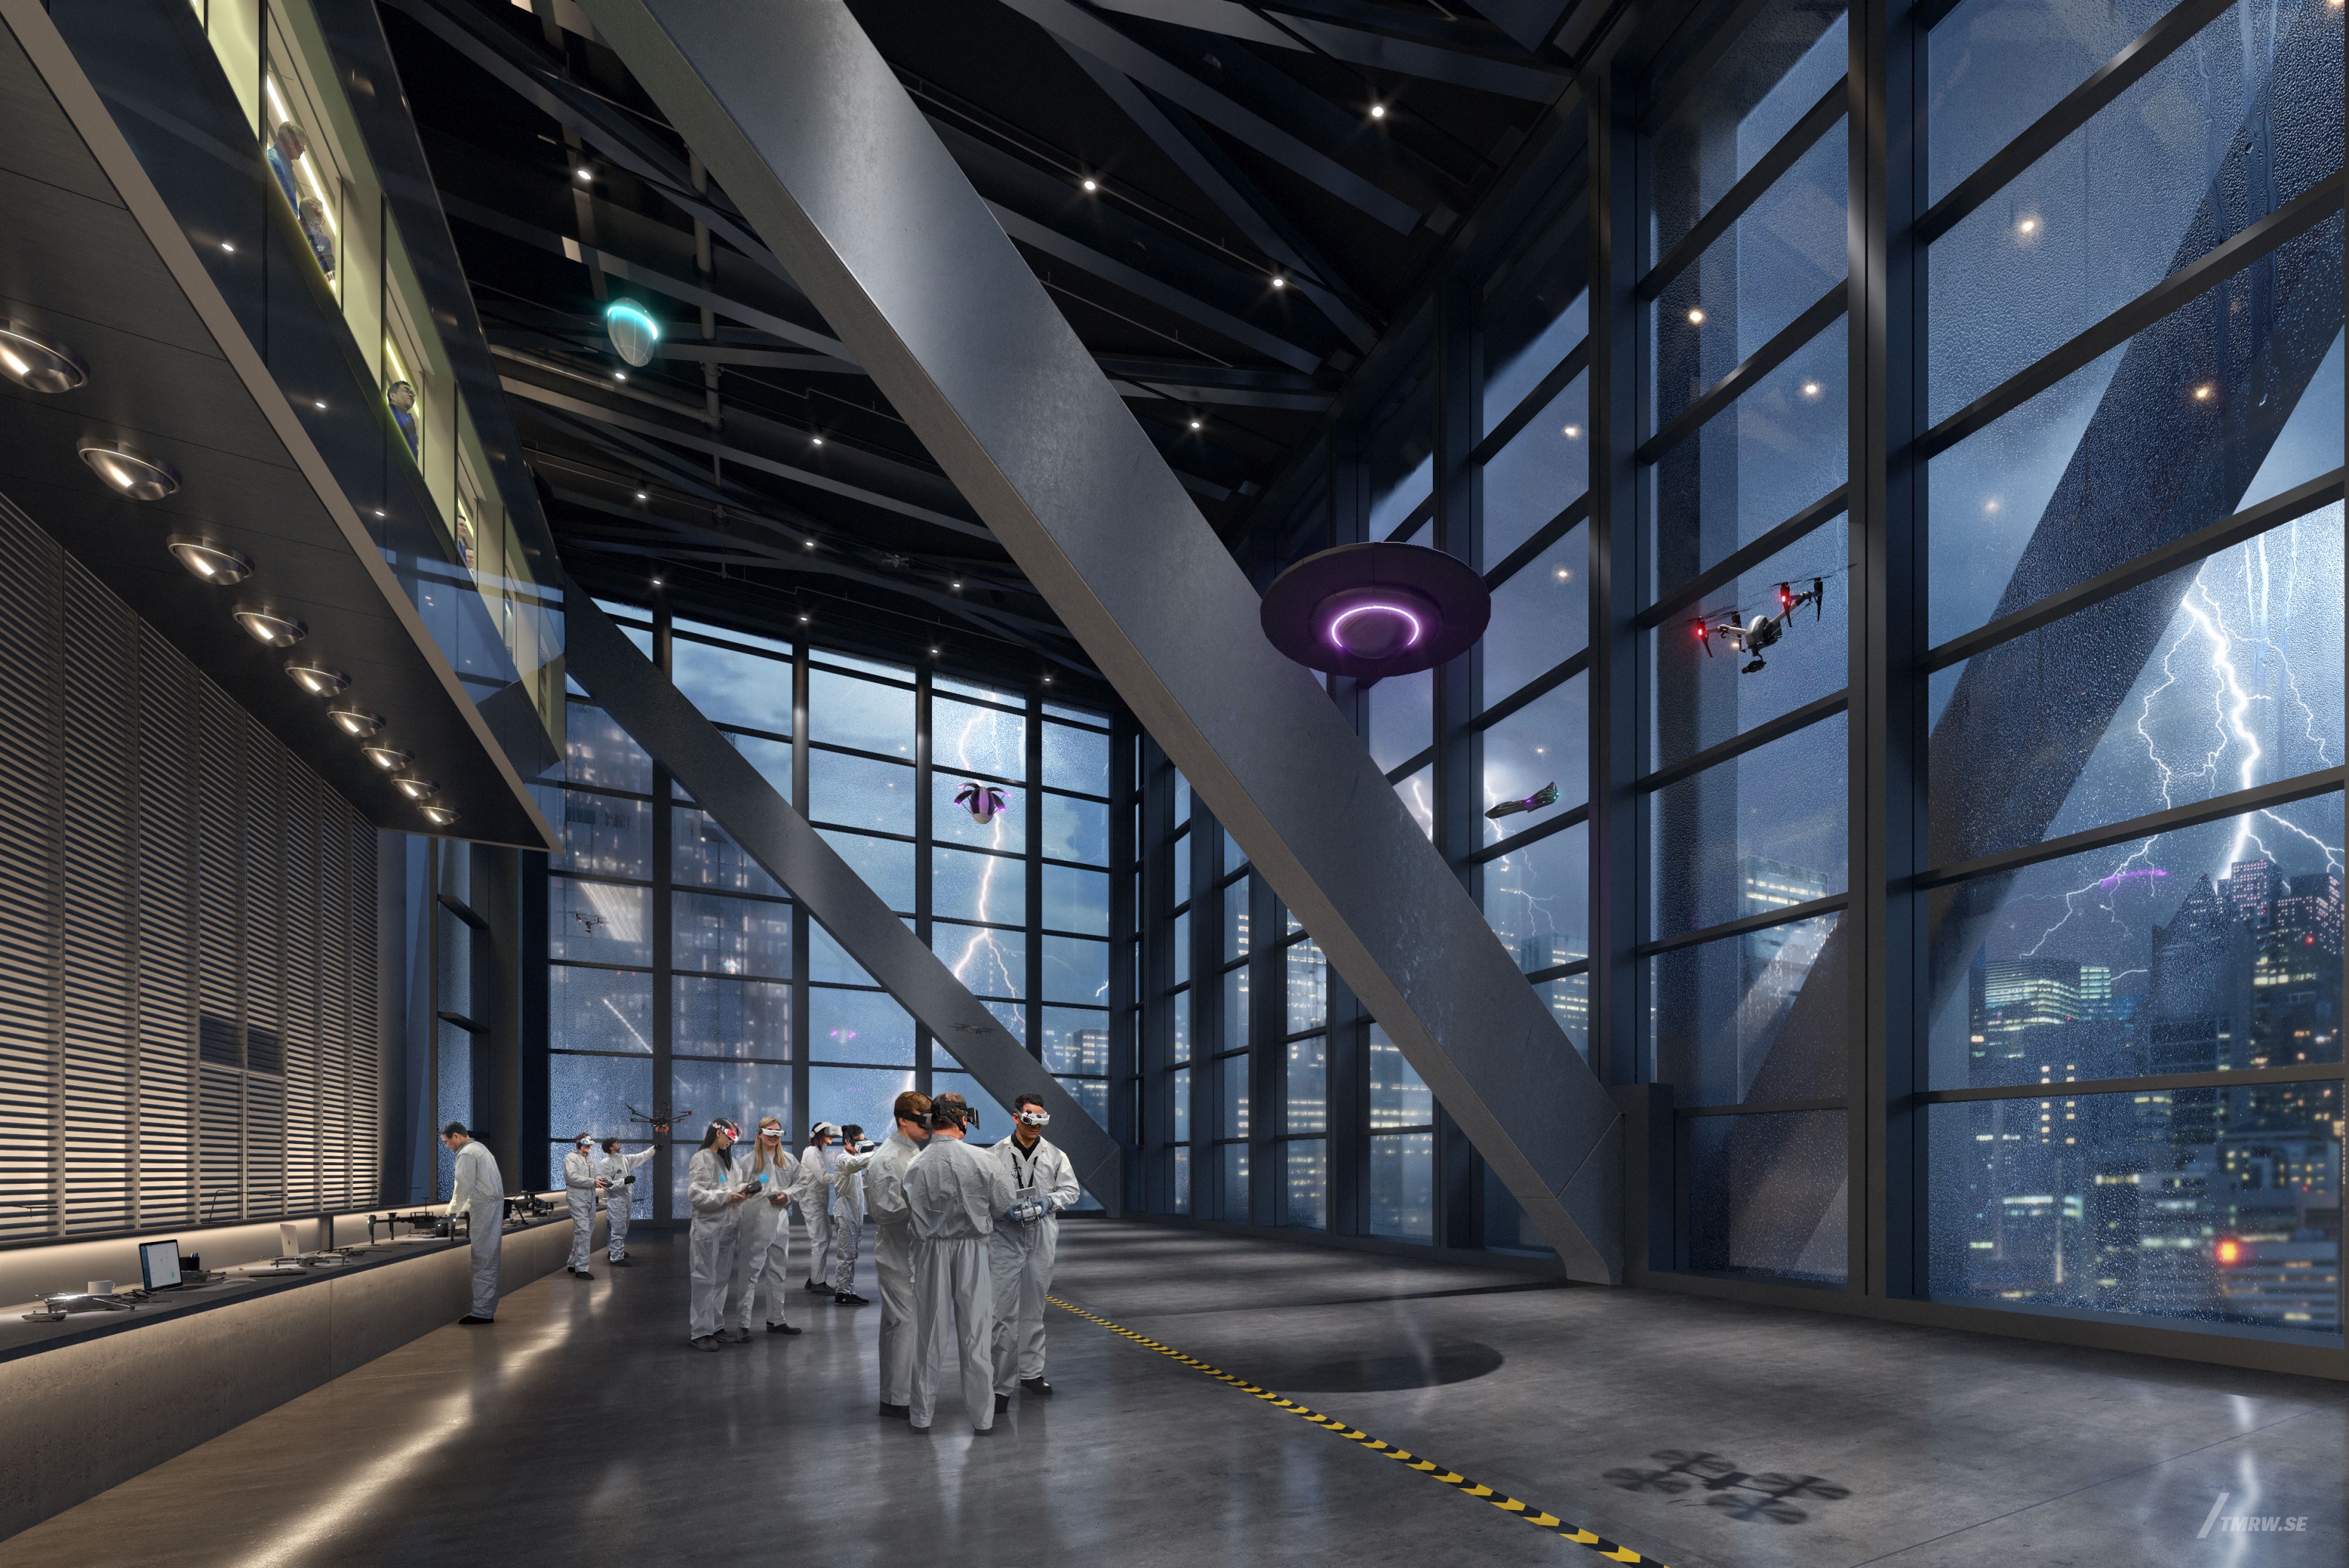 Architectural visualization of DJI for Foster + Partners. A image of the interior of the a testing room with several people inside a skyscaper building at night.